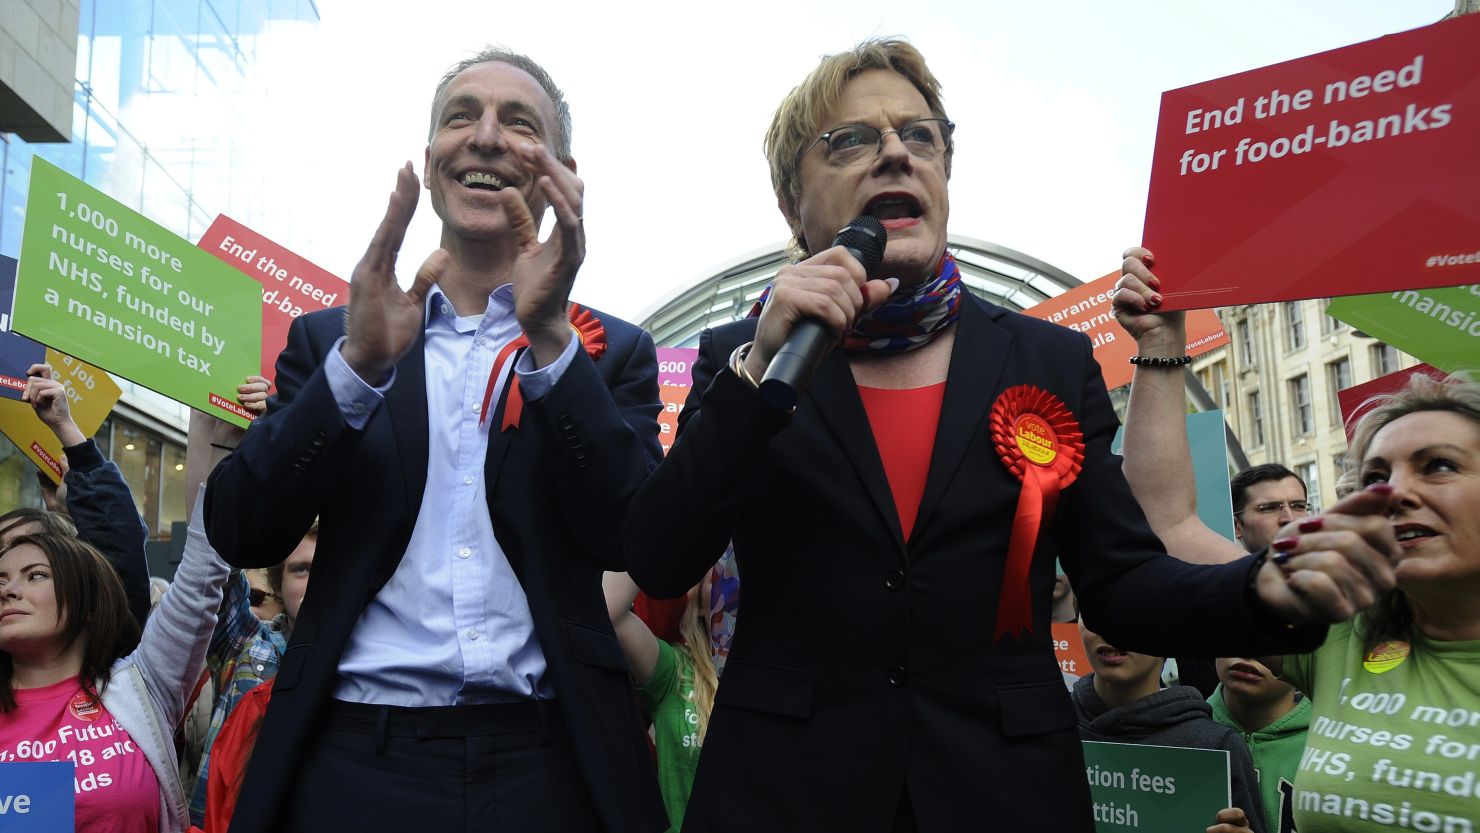 Scottish Labour Party Leader Jim Murphy (L) campaigns with British comedian and actor Eddie Izzard in Glasgow City Centre on May 4, 2015. Britain goes to the polls to elect a new parliament on May 7.